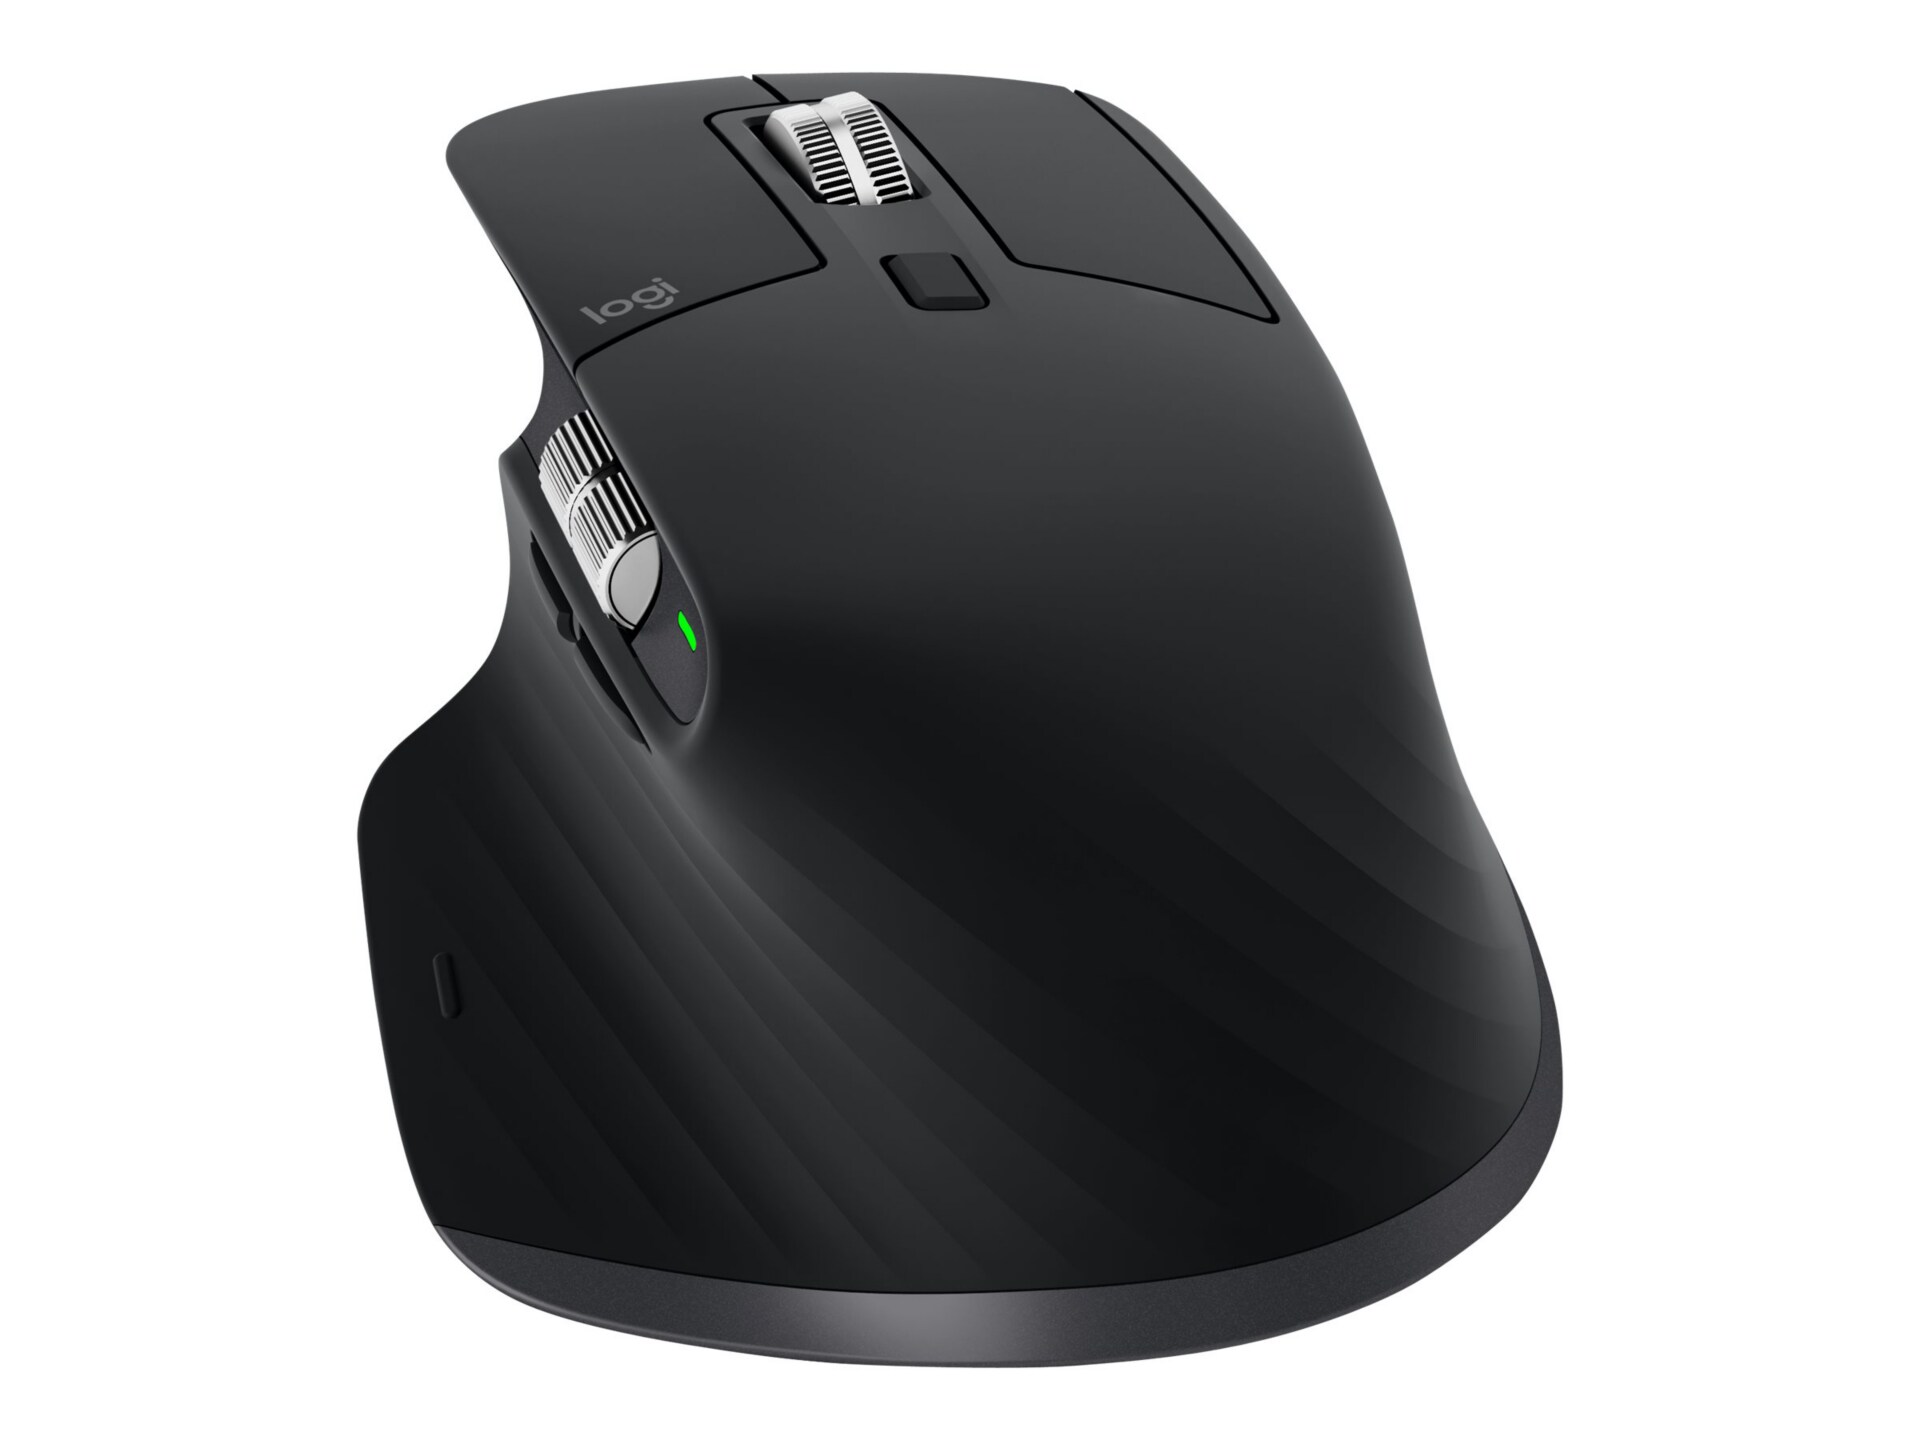 MX Master 3 Advanced Mouse - - Bluetooth, 2.4 GHz - - - -